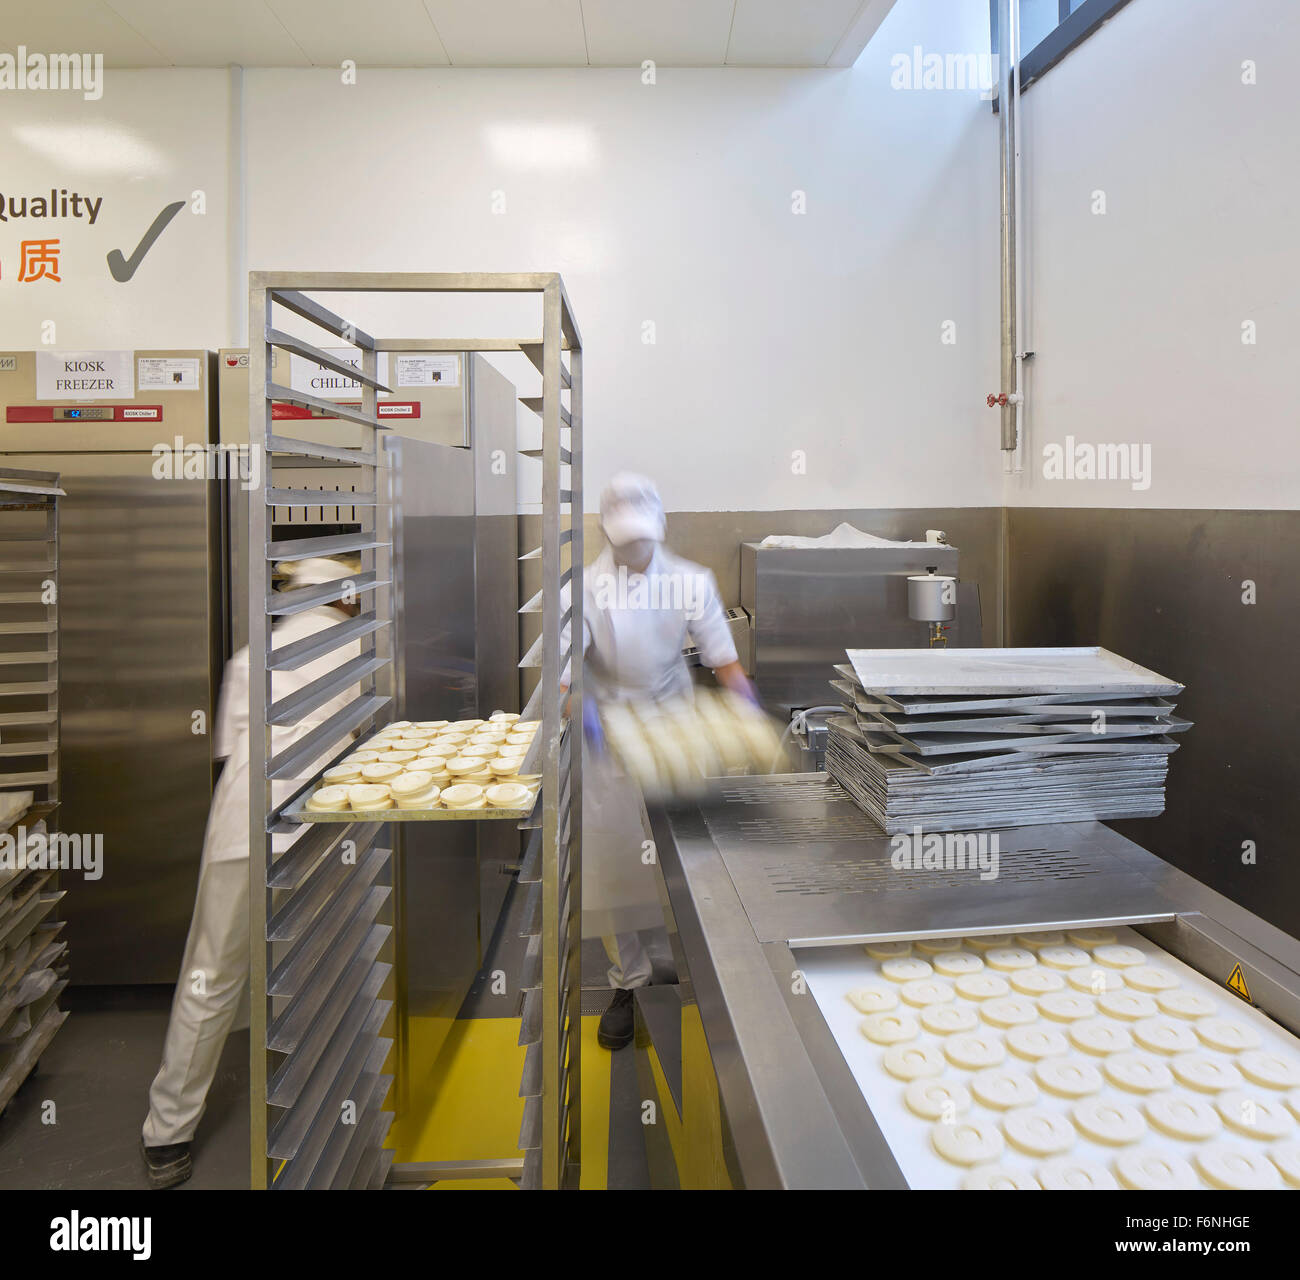 Industrial bakery with production line. BreadTalk IHQ, Singapore, Singapore. Architect: Kay Ngeee Tan Architects, 2014. Stock Photo